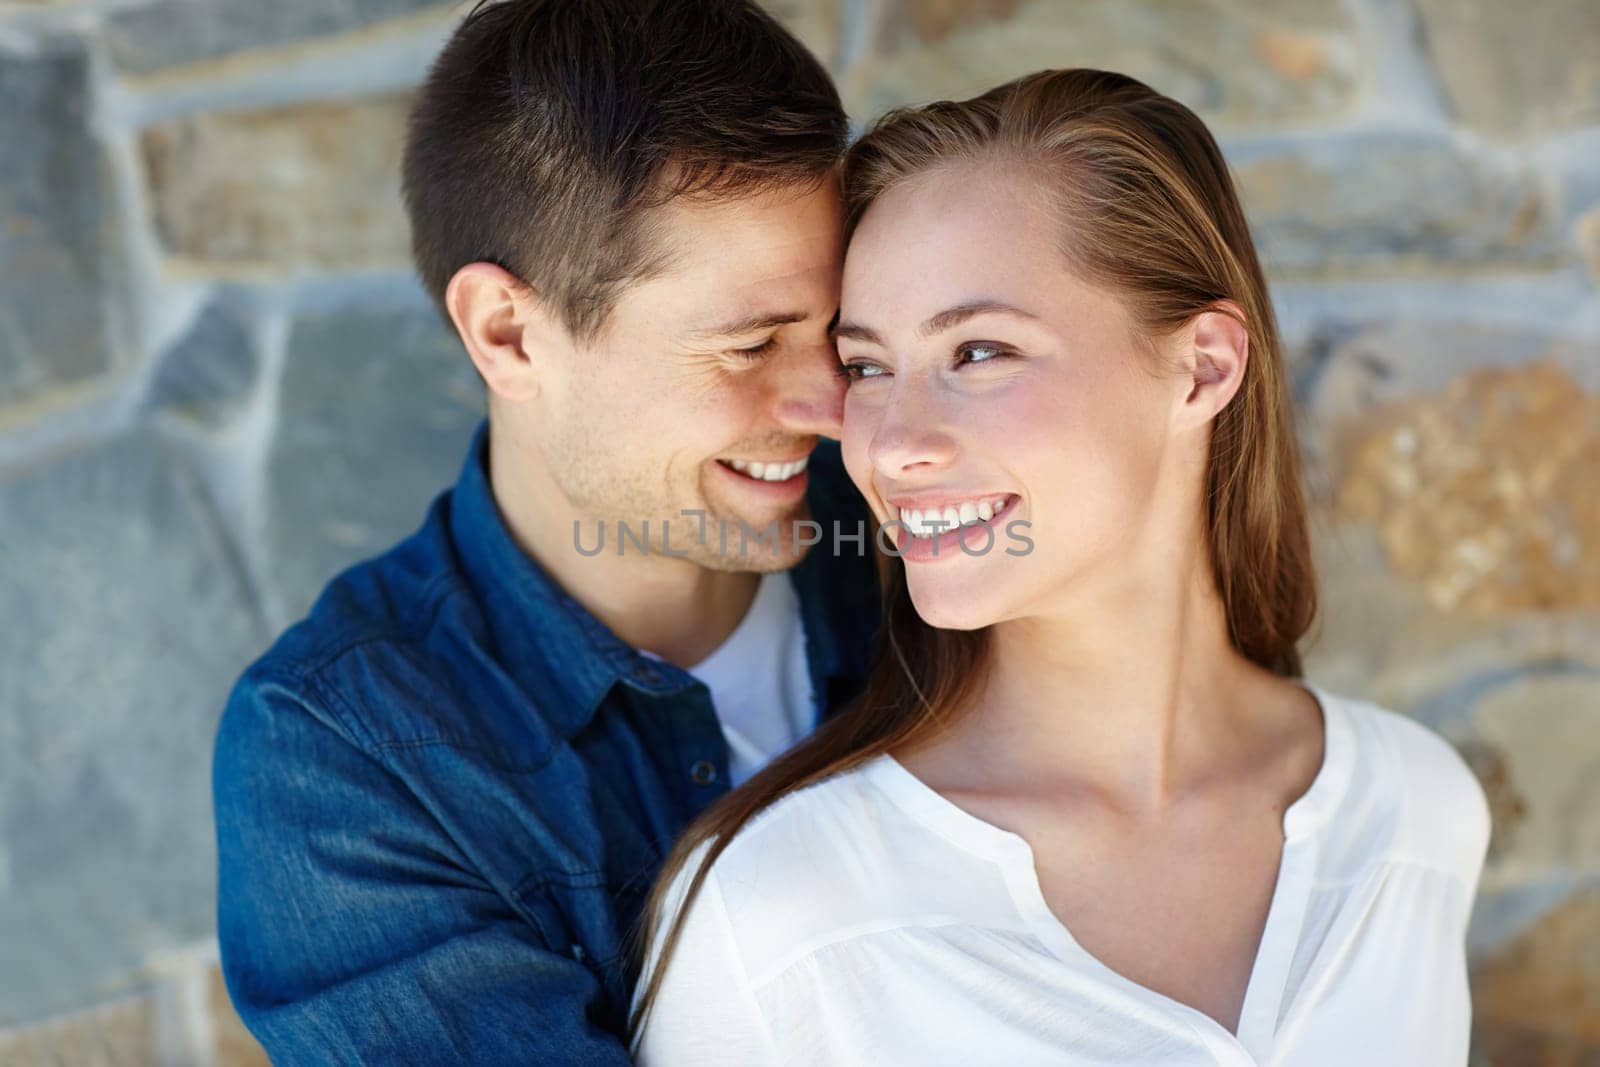 Outdoors, couple and embrace for love, touch and romance or care on wall background. Happy people, relaxing and smile for pride in relationship or commitment, loyalty and connection on holiday.